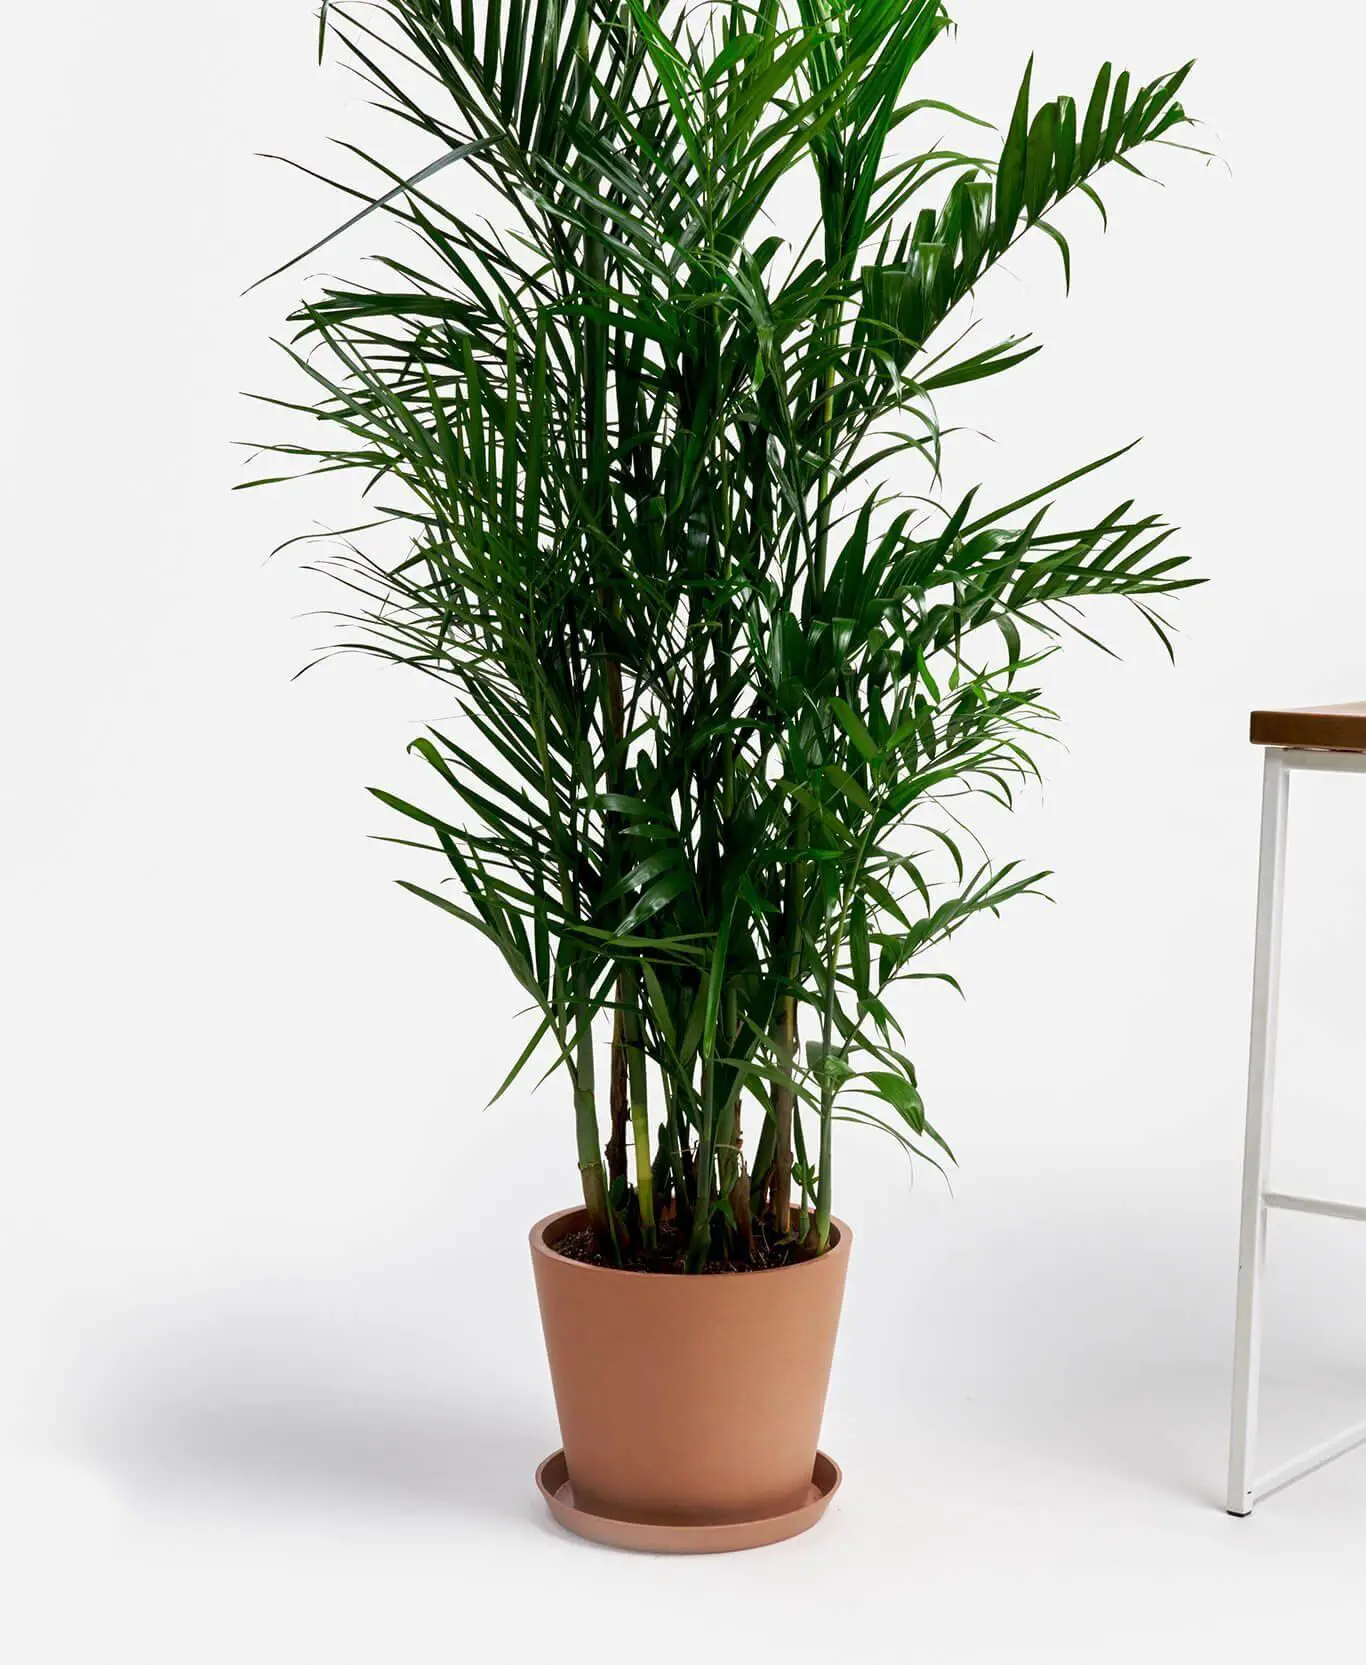 Buy Large, Potted Bamboo Palm Indoor Plant | Bloomscape in 2020 | Bamboo in pots, Bamboo palm indoor, Bamboo palm